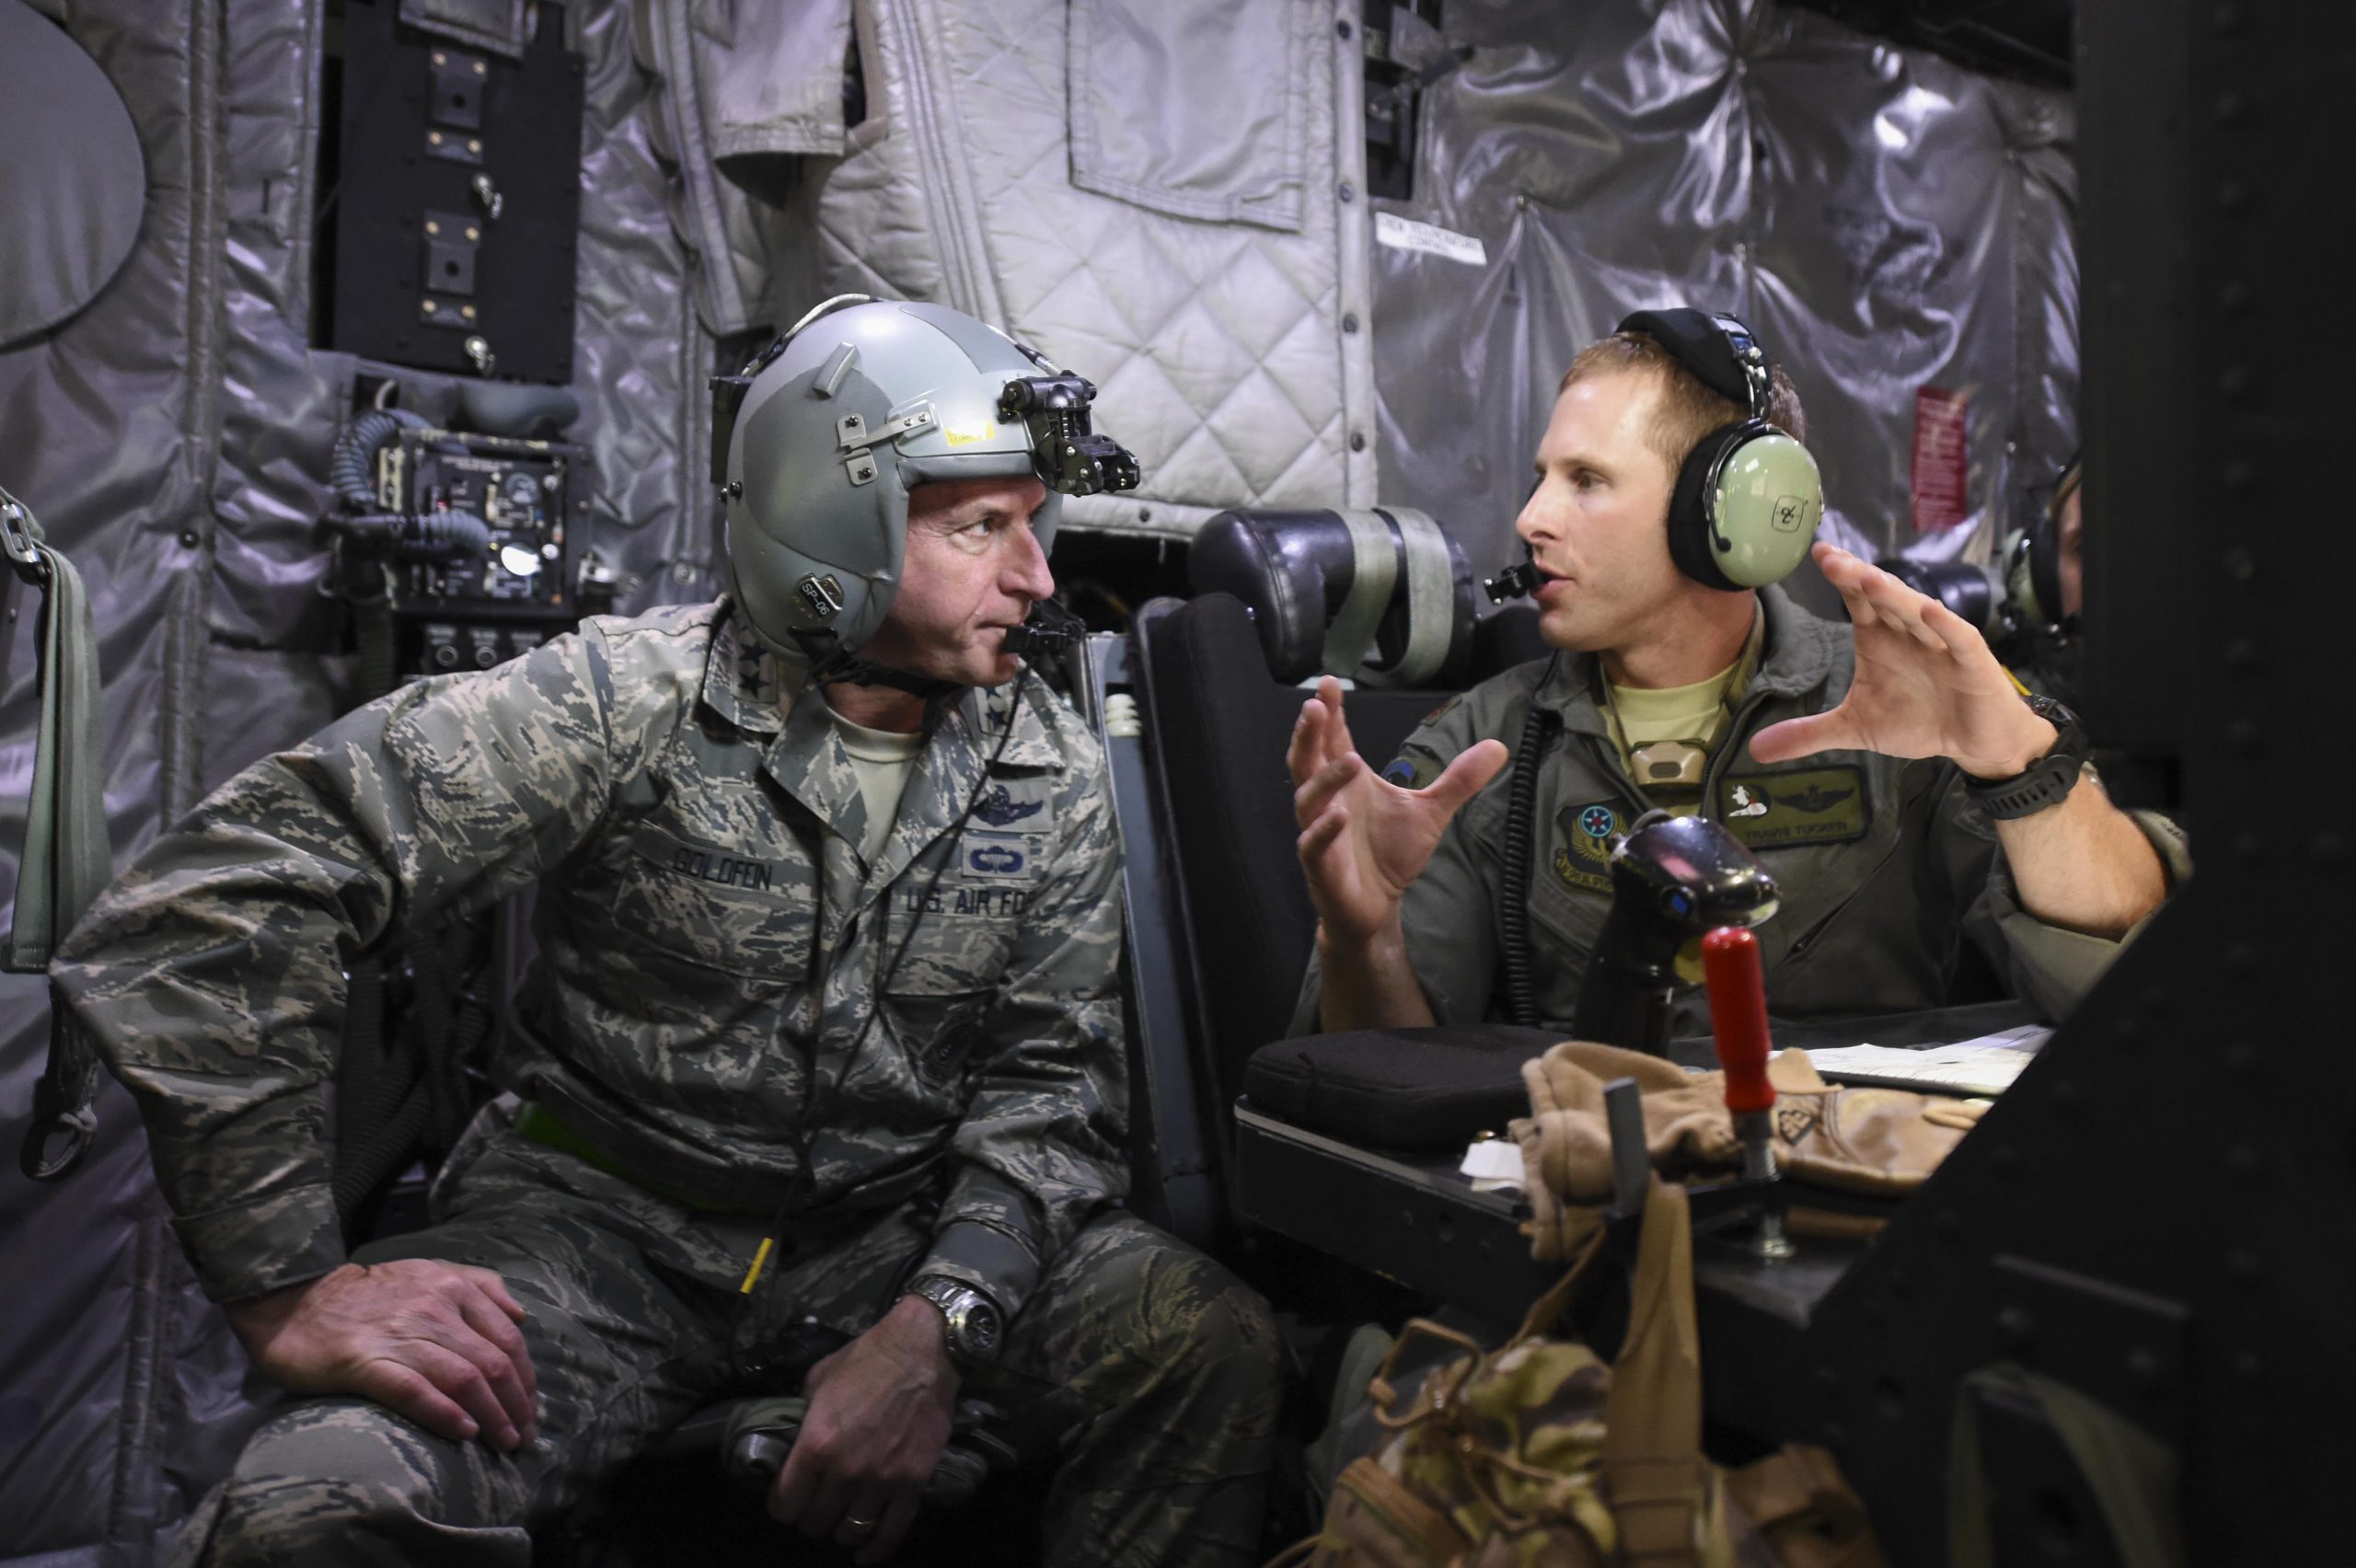 Air Force Maj. Travis Tucker, fire control officer with the 4th Special Operations Squadron, right, explains an AC-130U Spooky gunship’s weapons systems to Air Force Chief of Staff Gen. David L. Goldfein during a mission orientation flight at Hurlburt Field, Fla., Oct. 19, 2016. Air Force photo by Senior Airman Jeff Parkinson. -